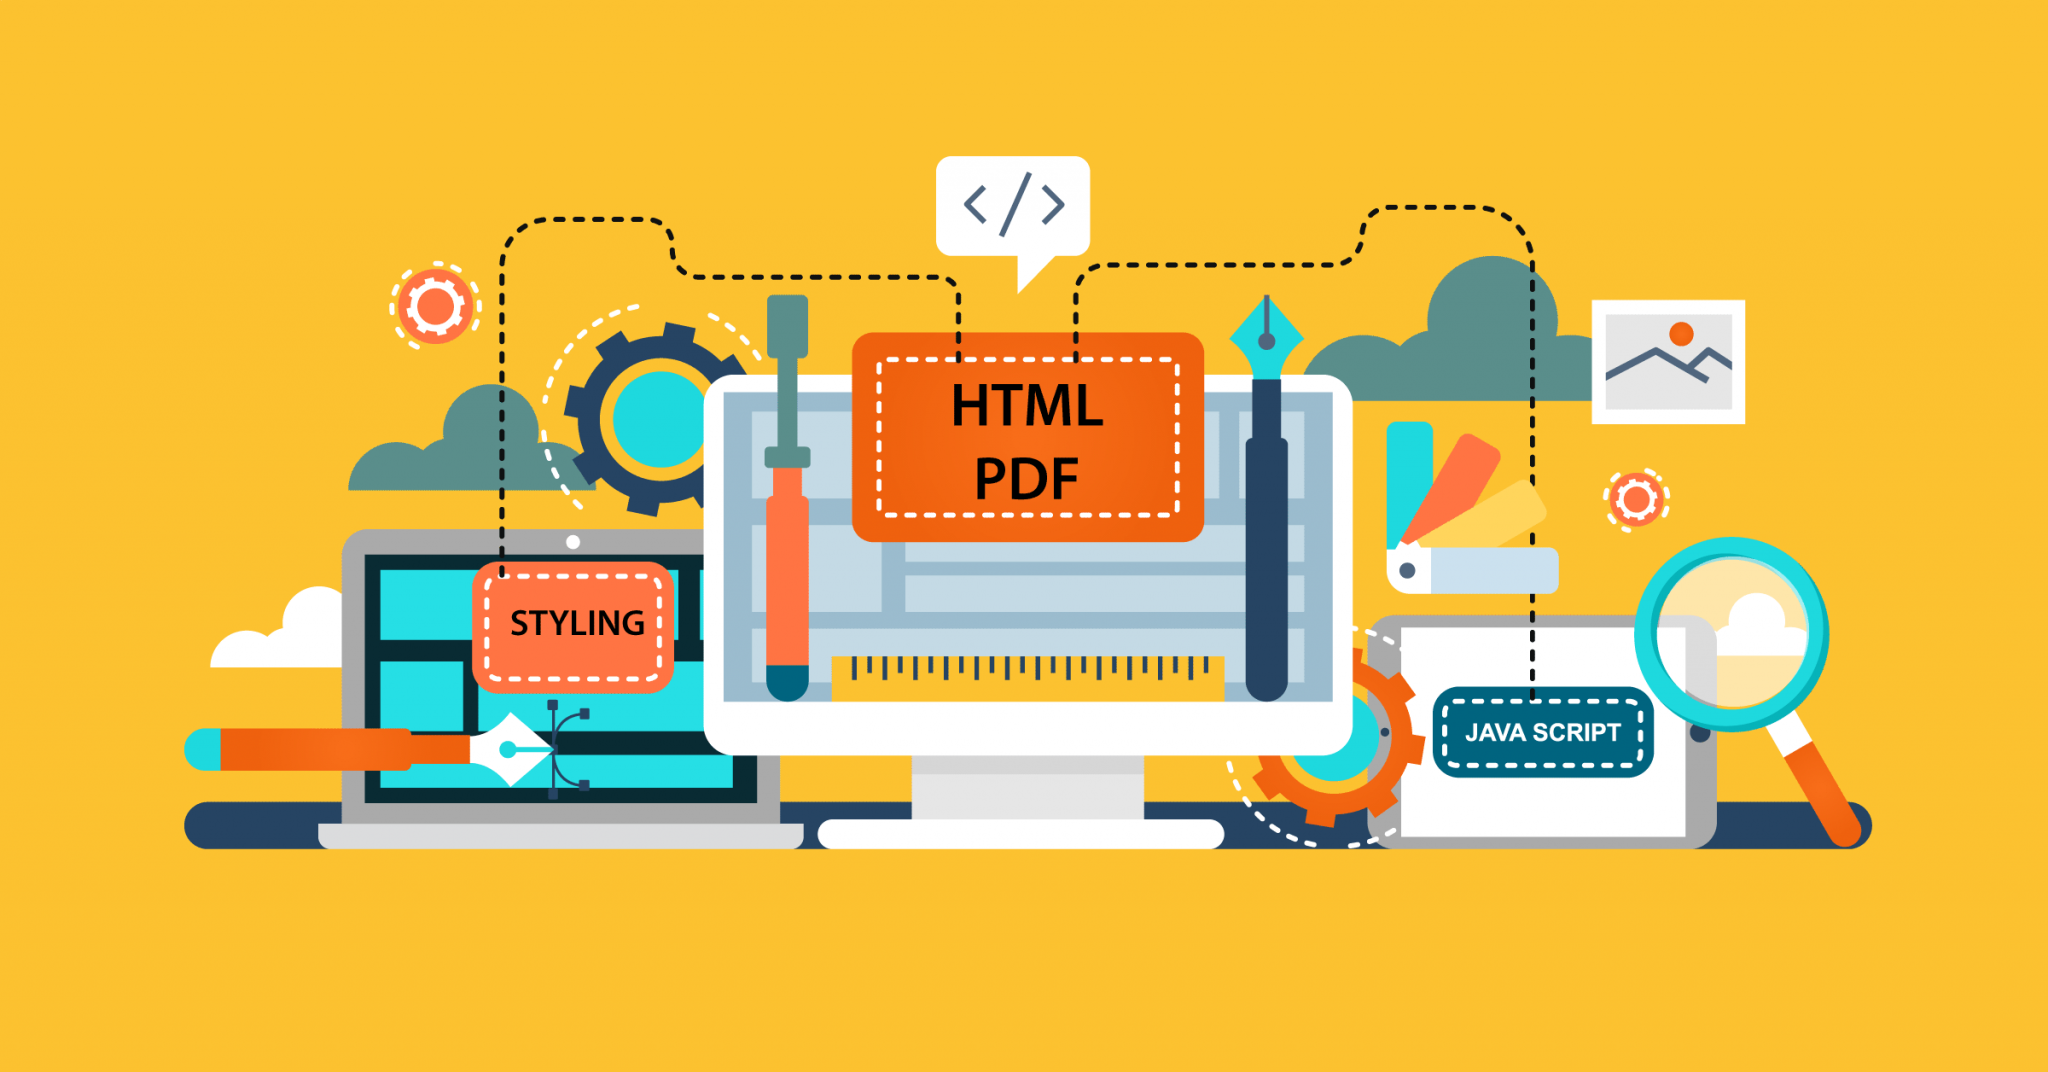 Illustrated webinar design showing concept of behind-the-scenes website icons, like Styling, HTML, and PDF.